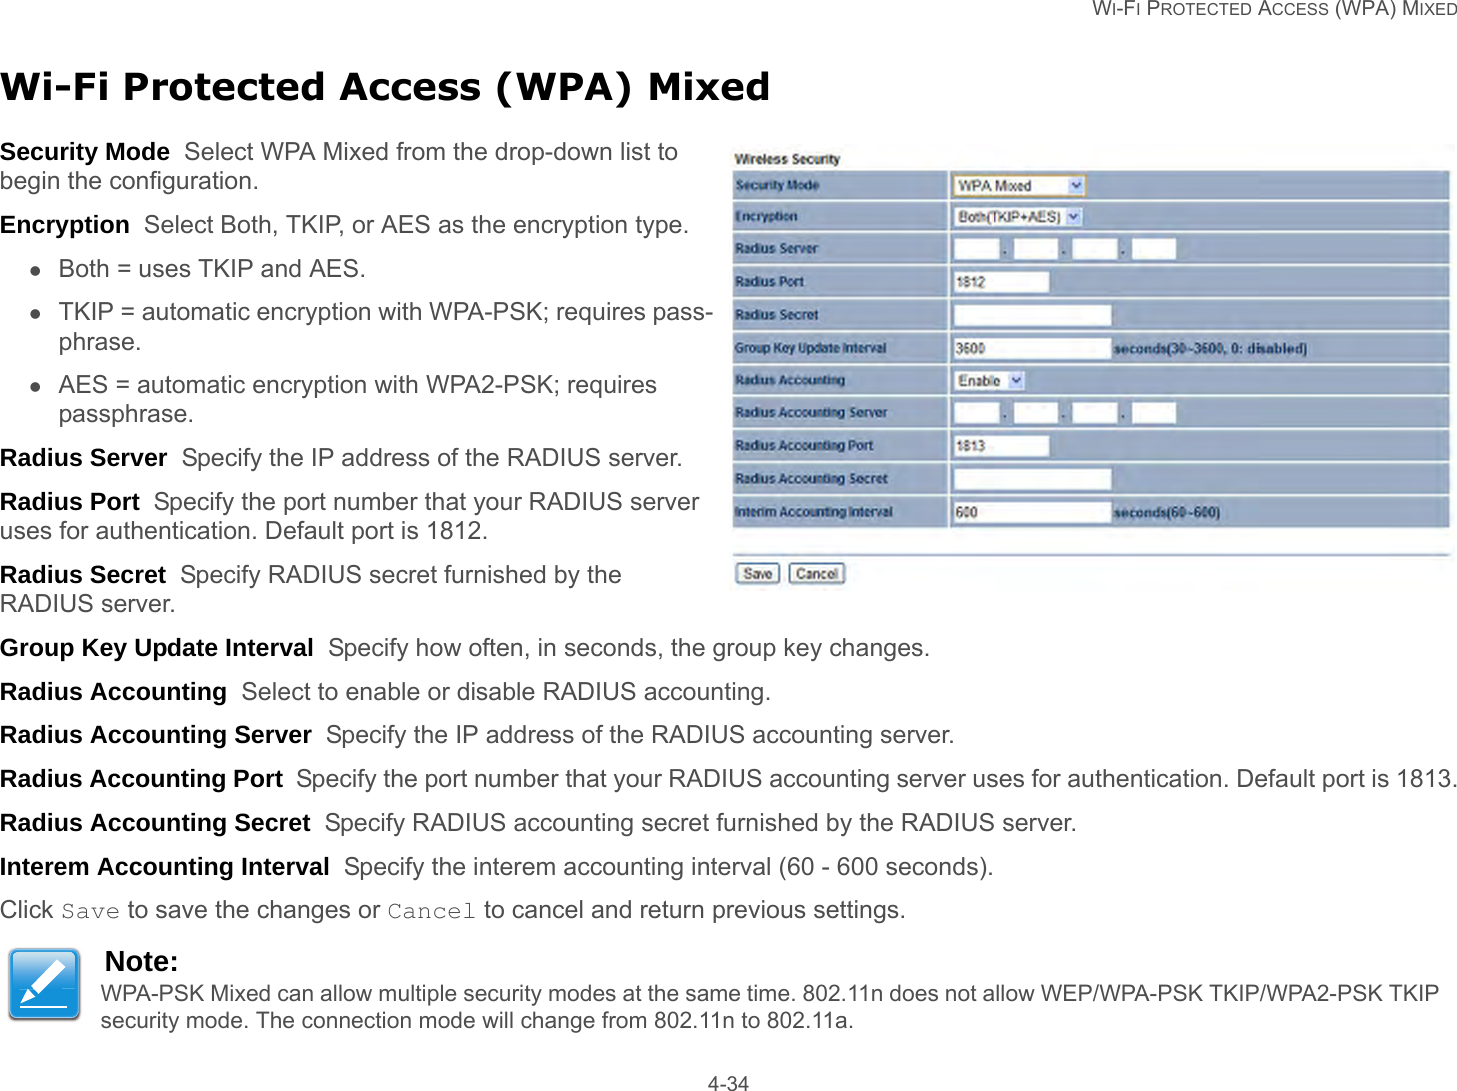   WI-FI PROTECTED ACCESS (WPA) MIXED 4-34Wi-Fi Protected Access (WPA) MixedSecurity Mode  Select WPA Mixed from the drop-down list to begin the configuration.Encryption  Select Both, TKIP, or AES as the encryption type.Both = uses TKIP and AES.TKIP = automatic encryption with WPA-PSK; requires pass-phrase.AES = automatic encryption with WPA2-PSK; requires passphrase.Radius Server  Specify the IP address of the RADIUS server.Radius Port  Specify the port number that your RADIUS server uses for authentication. Default port is 1812.Radius Secret  Specify RADIUS secret furnished by the RADIUS server.Group Key Update Interval  Specify how often, in seconds, the group key changes.Radius Accounting  Select to enable or disable RADIUS accounting.Radius Accounting Server  Specify the IP address of the RADIUS accounting server.Radius Accounting Port  Specify the port number that your RADIUS accounting server uses for authentication. Default port is 1813.Radius Accounting Secret  Specify RADIUS accounting secret furnished by the RADIUS server.Interem Accounting Interval  Specify the interem accounting interval (60 - 600 seconds).Click Save to save the changes or Cancel to cancel and return previous settings.Note:WPA-PSK Mixed can allow multiple security modes at the same time. 802.11n does not allow WEP/WPA-PSK TKIP/WPA2-PSK TKIP security mode. The connection mode will change from 802.11n to 802.11a.